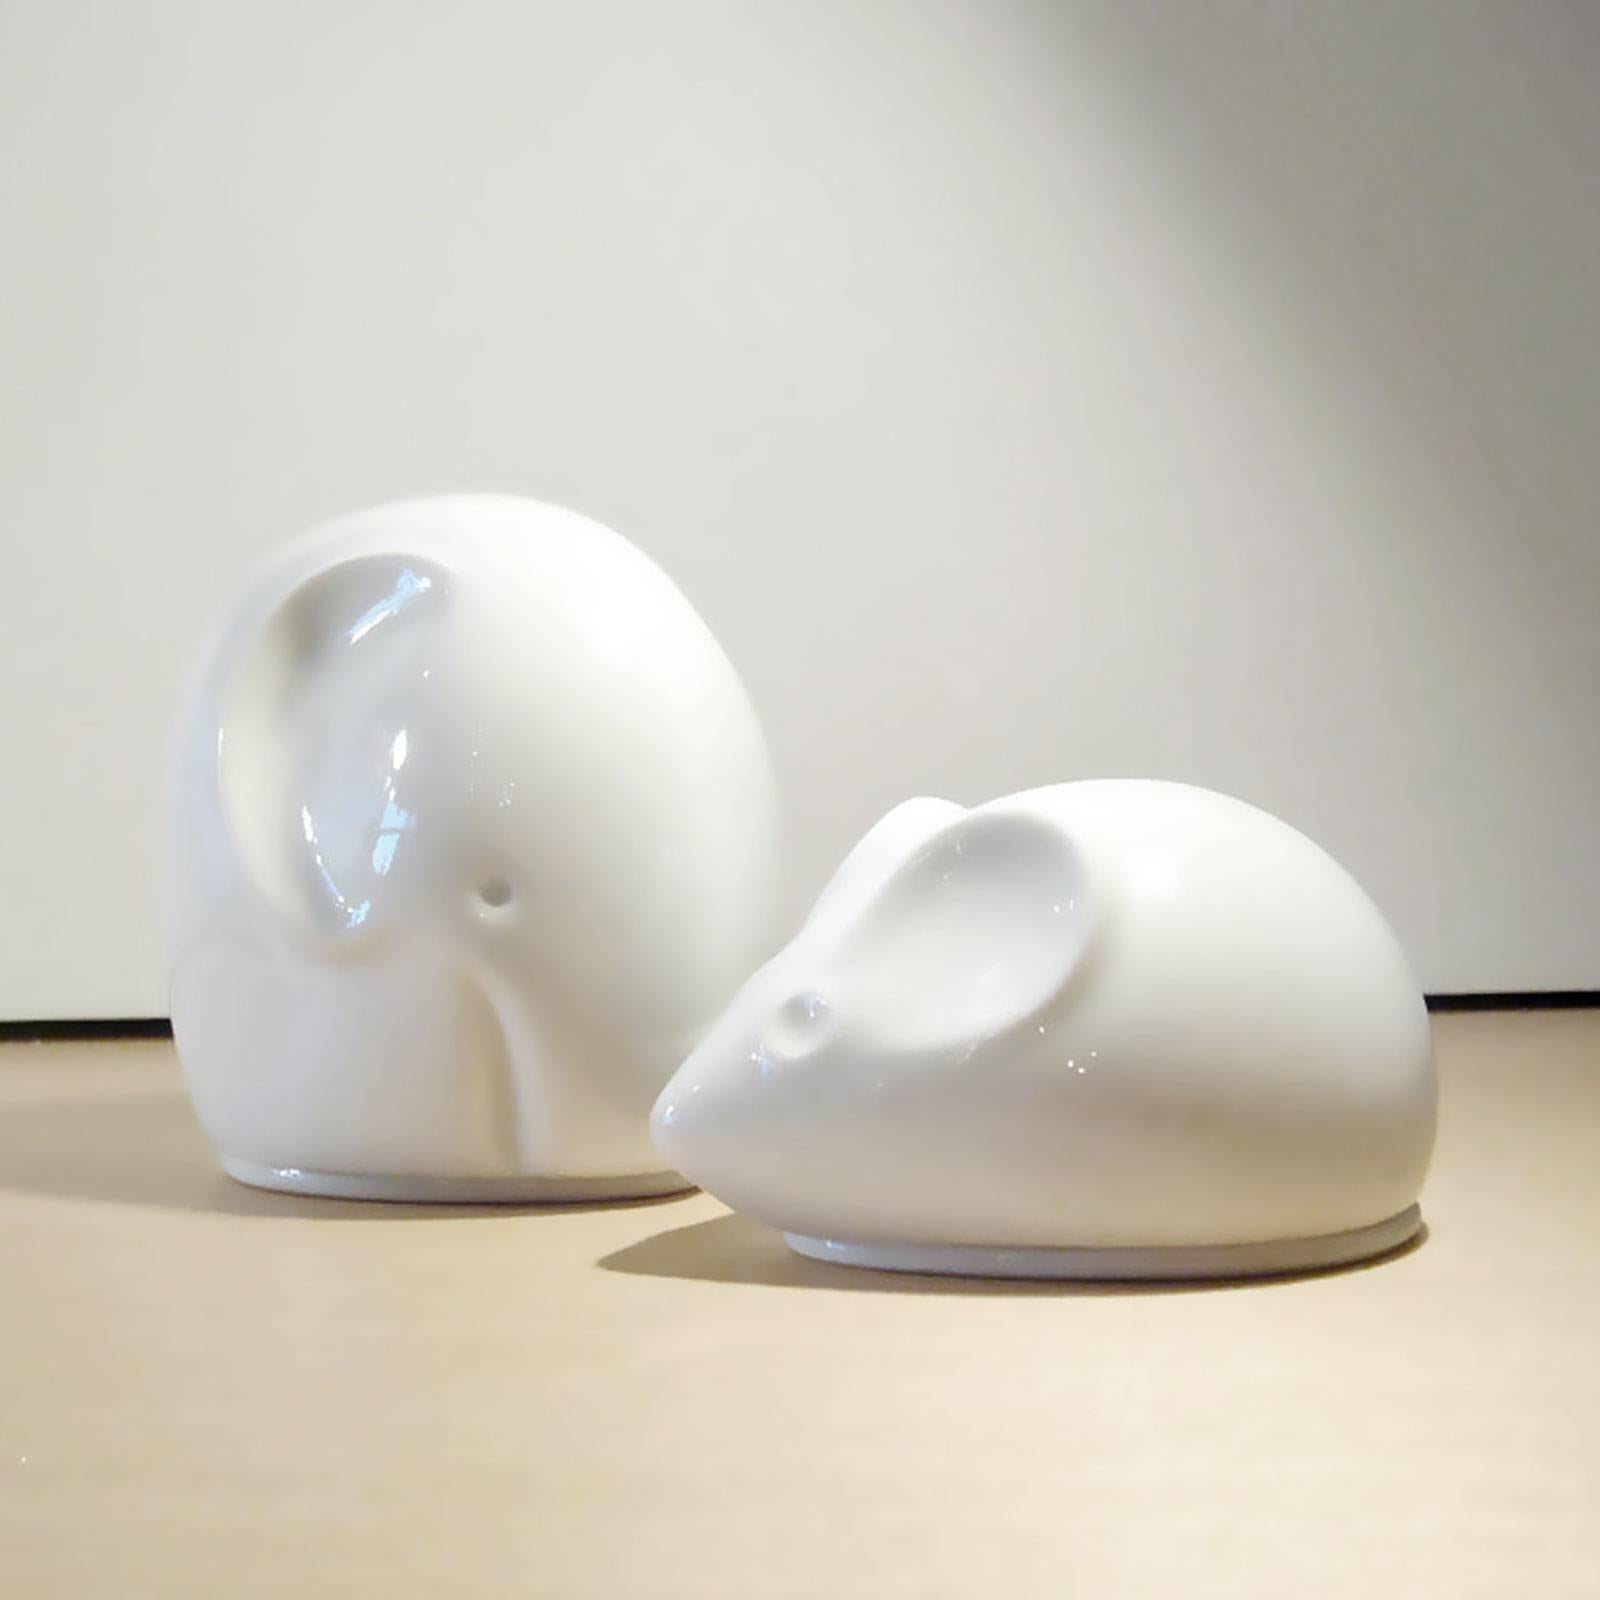 Precious white porcelain elephant and mouse 'containers' by Arzberg, Germany, signed, elephant: 3.25 in H x 2.5 in W, mouse: 1.5 in H x 3.0 in W.